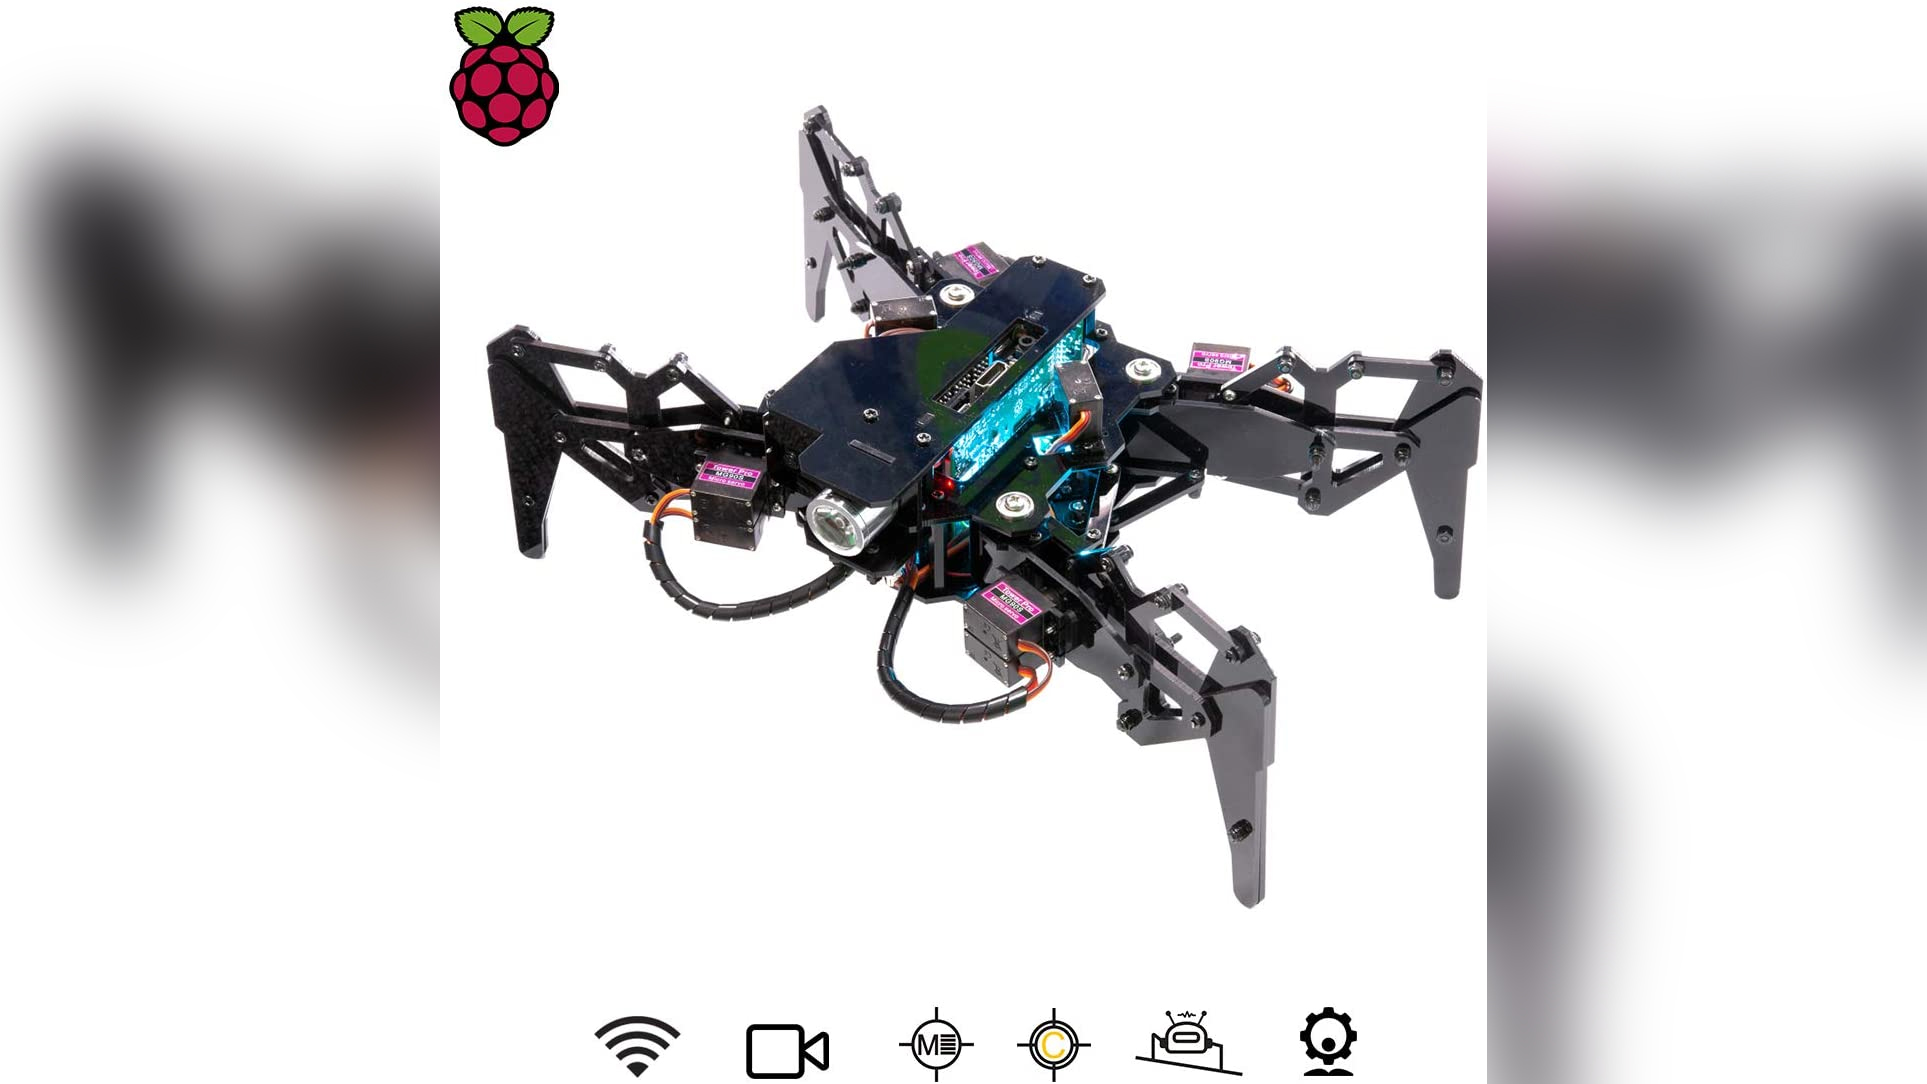 Save 25% on this Bionic Quadruped Spider Robot for Raspberry Pi 